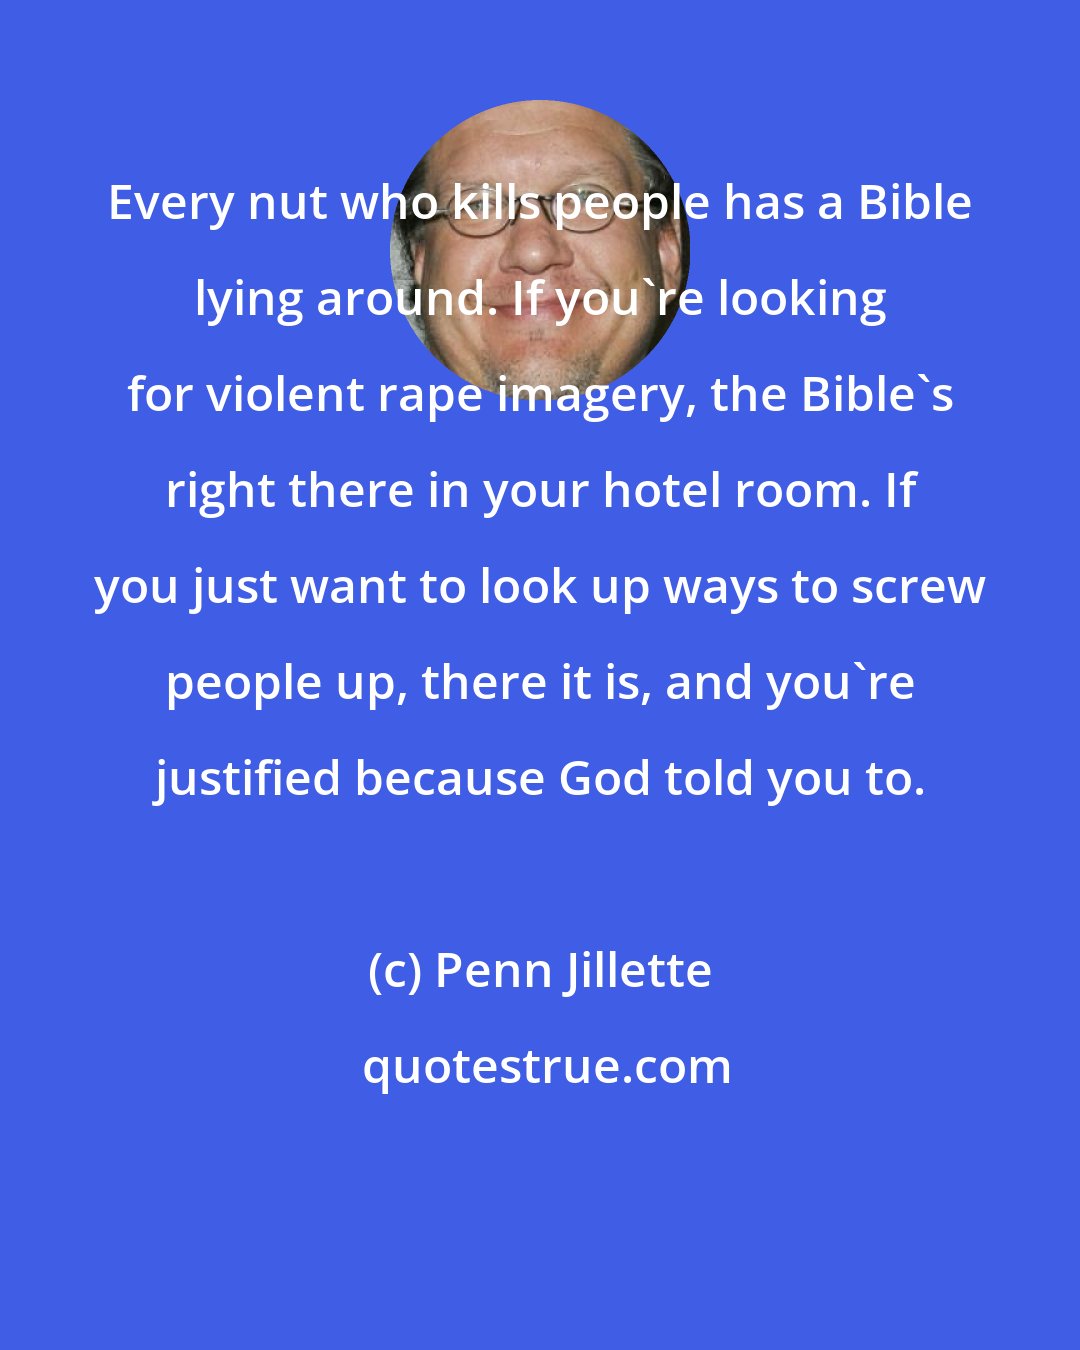 Penn Jillette: Every nut who kills people has a Bible lying around. If you're looking for violent rape imagery, the Bible's right there in your hotel room. If you just want to look up ways to screw people up, there it is, and you're justified because God told you to.